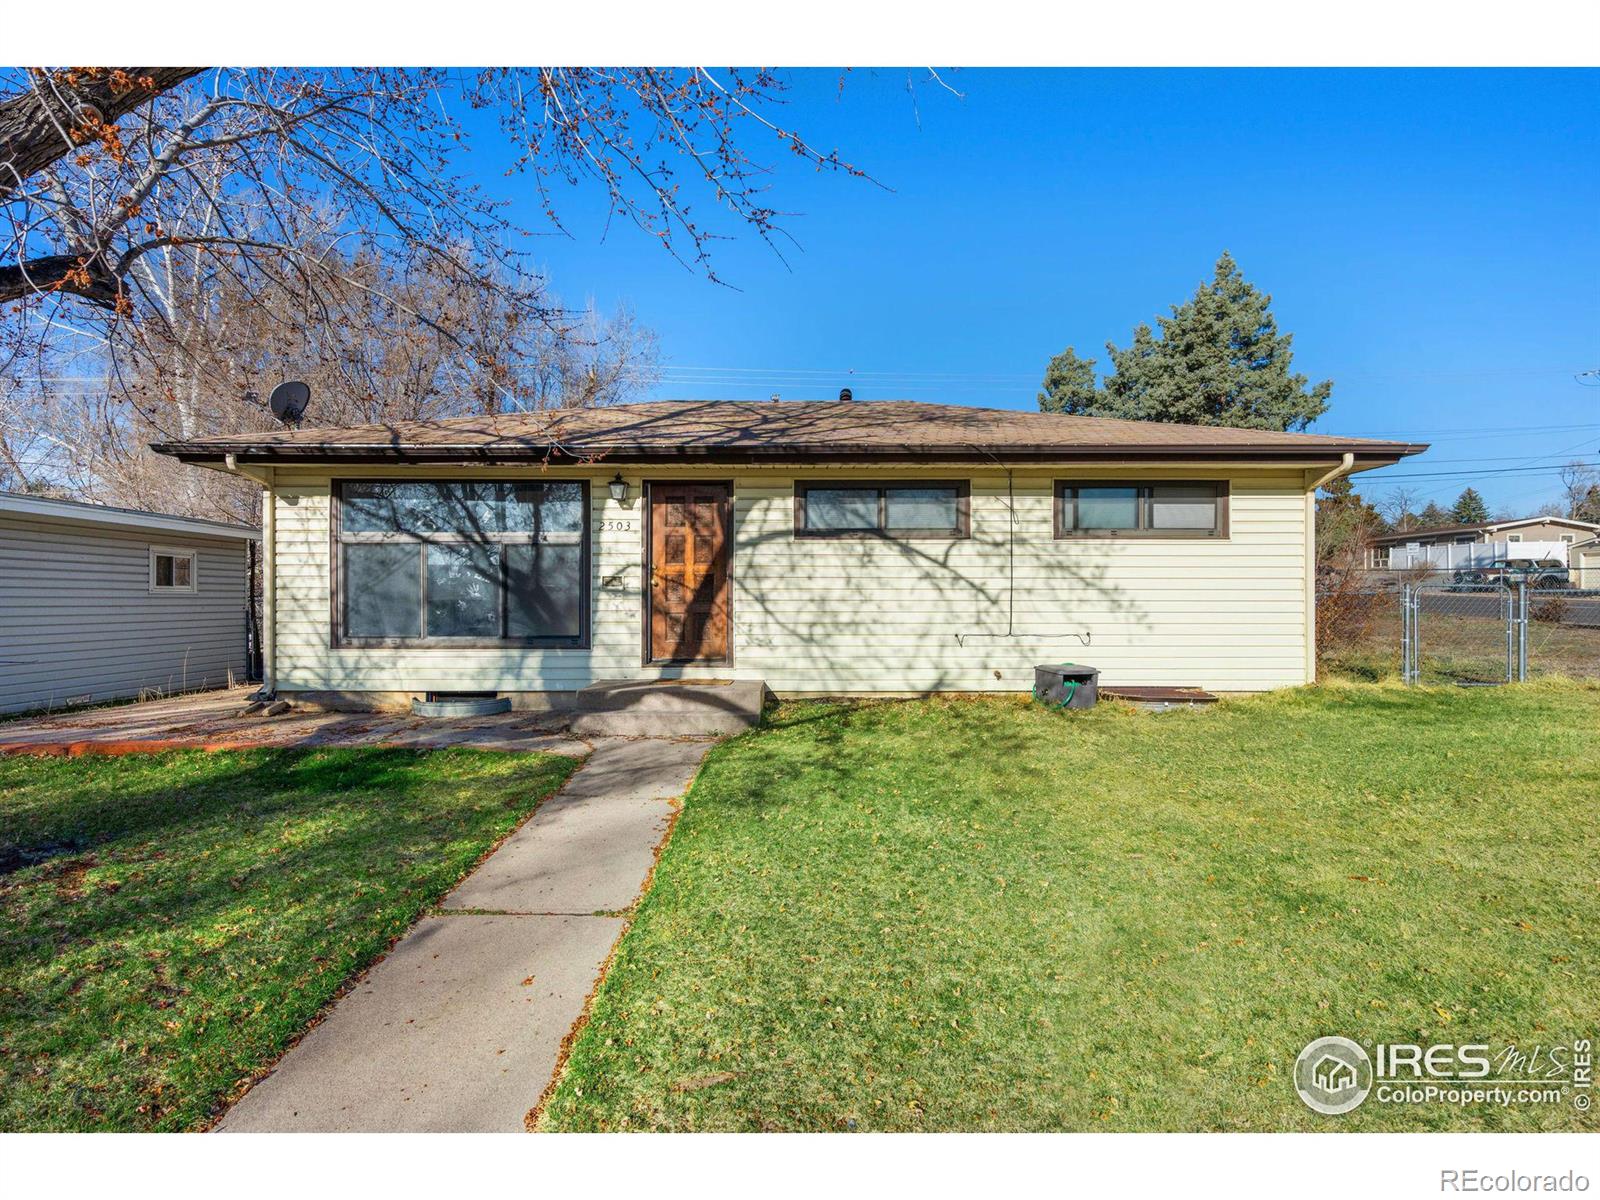 2503  16th Avenue, greeley MLS: 4567891005808 Beds: 4 Baths: 2 Price: $325,000